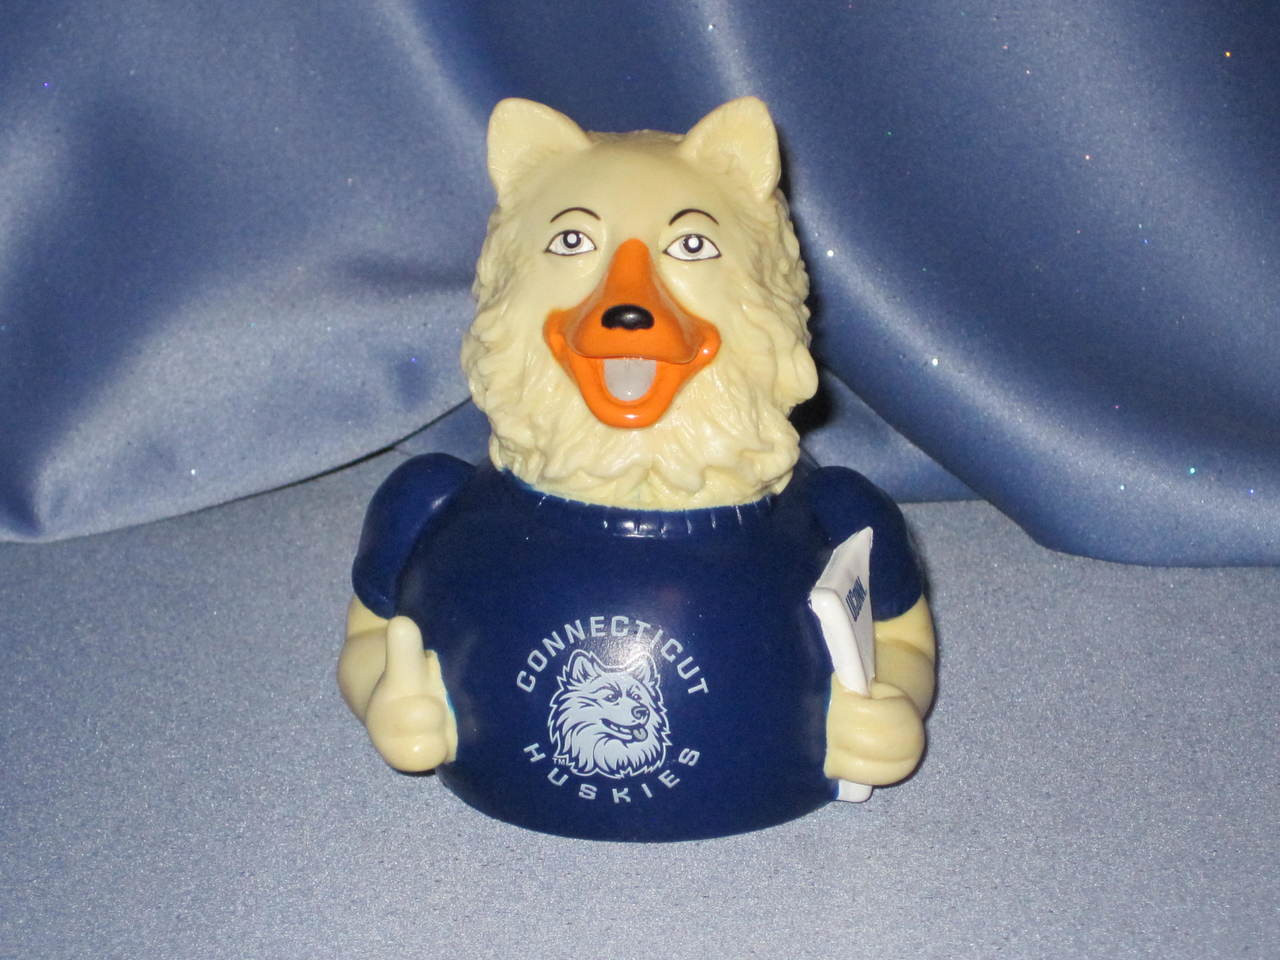 UConn Husky Rubber Duck Dog by Celebriducks -. - Now and Then